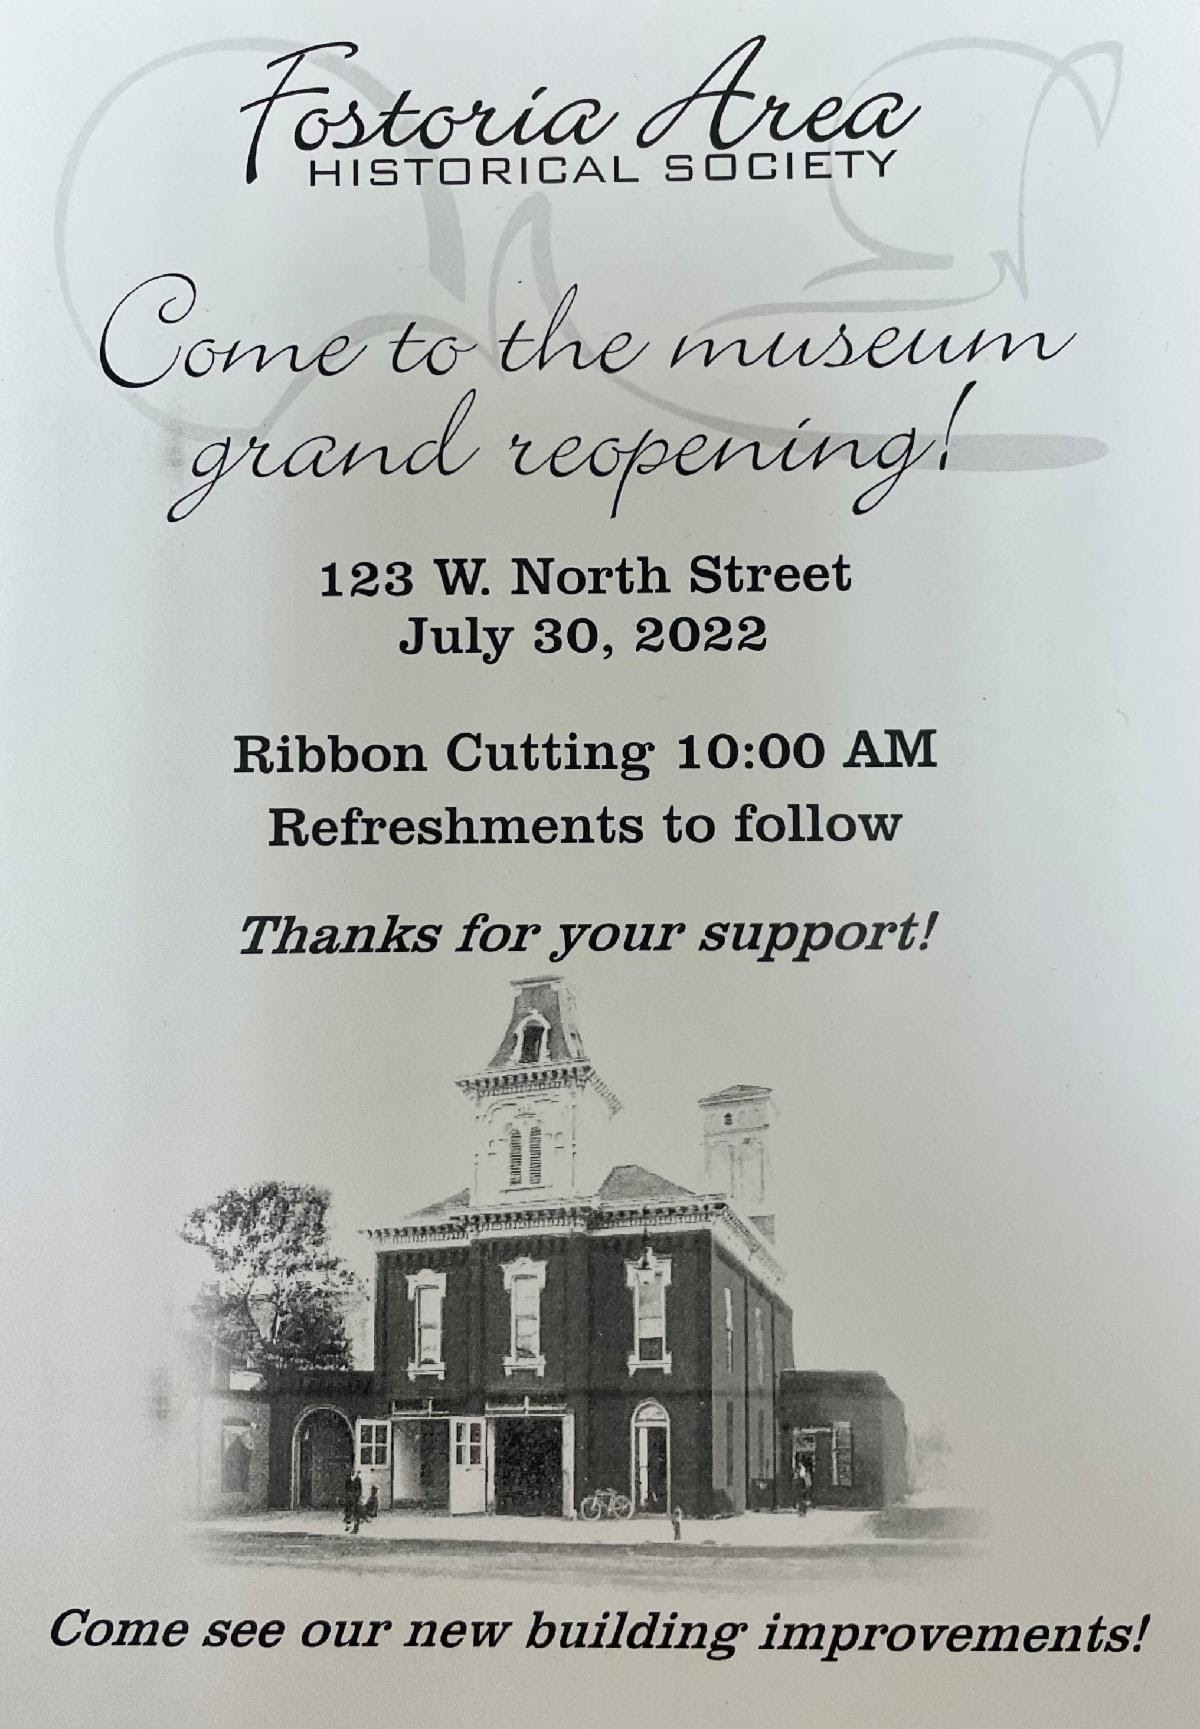 Fostoria Area Historical Society Museum Ribbon Cutting for Grand Reopening